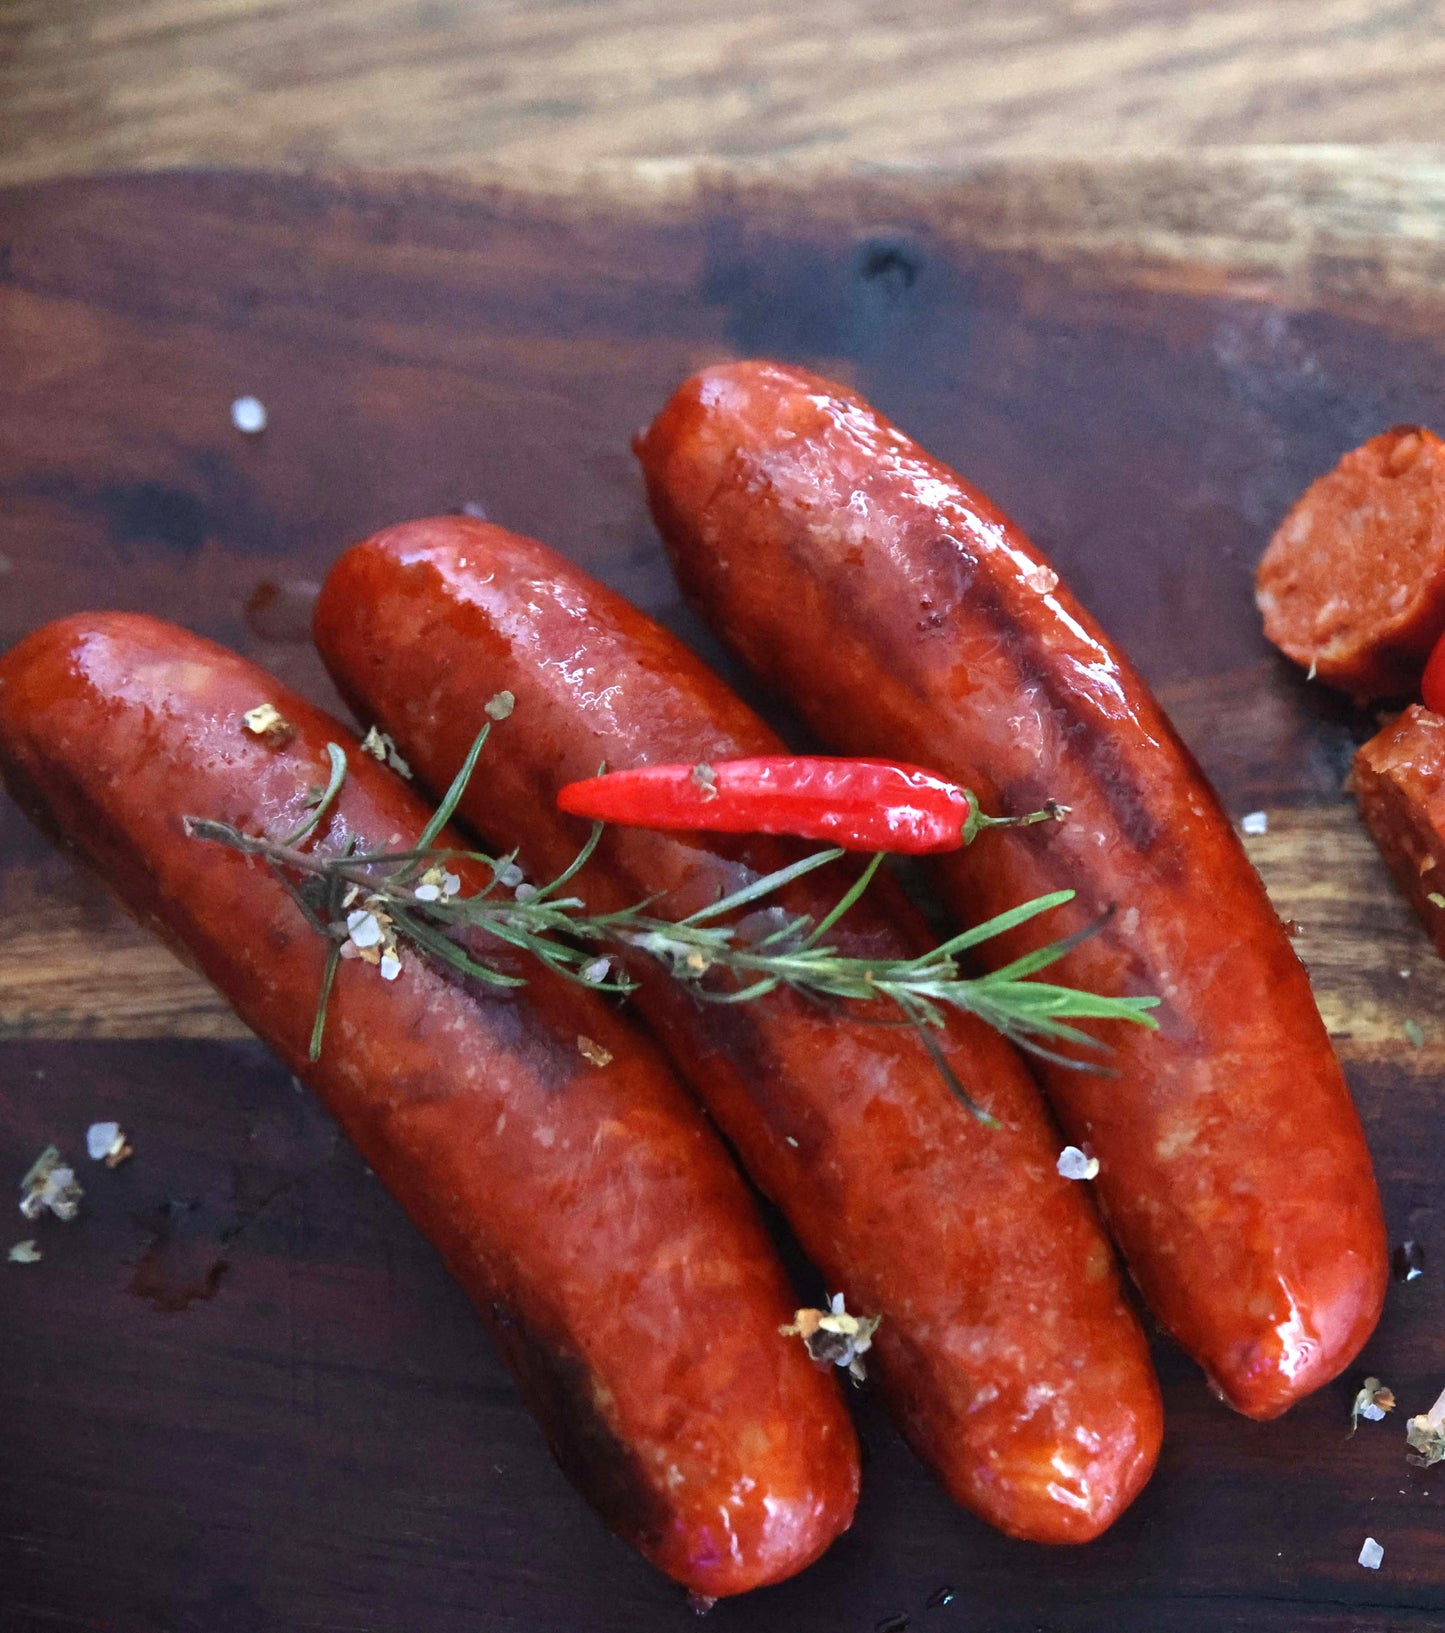 Fresh Spanish Chorizo Random weight approx. 1kg packet 8 pieces regular price $16.00 AUD. You are guaranteed to receive at least 950g of product, equivalent price of $16.84 per kg.